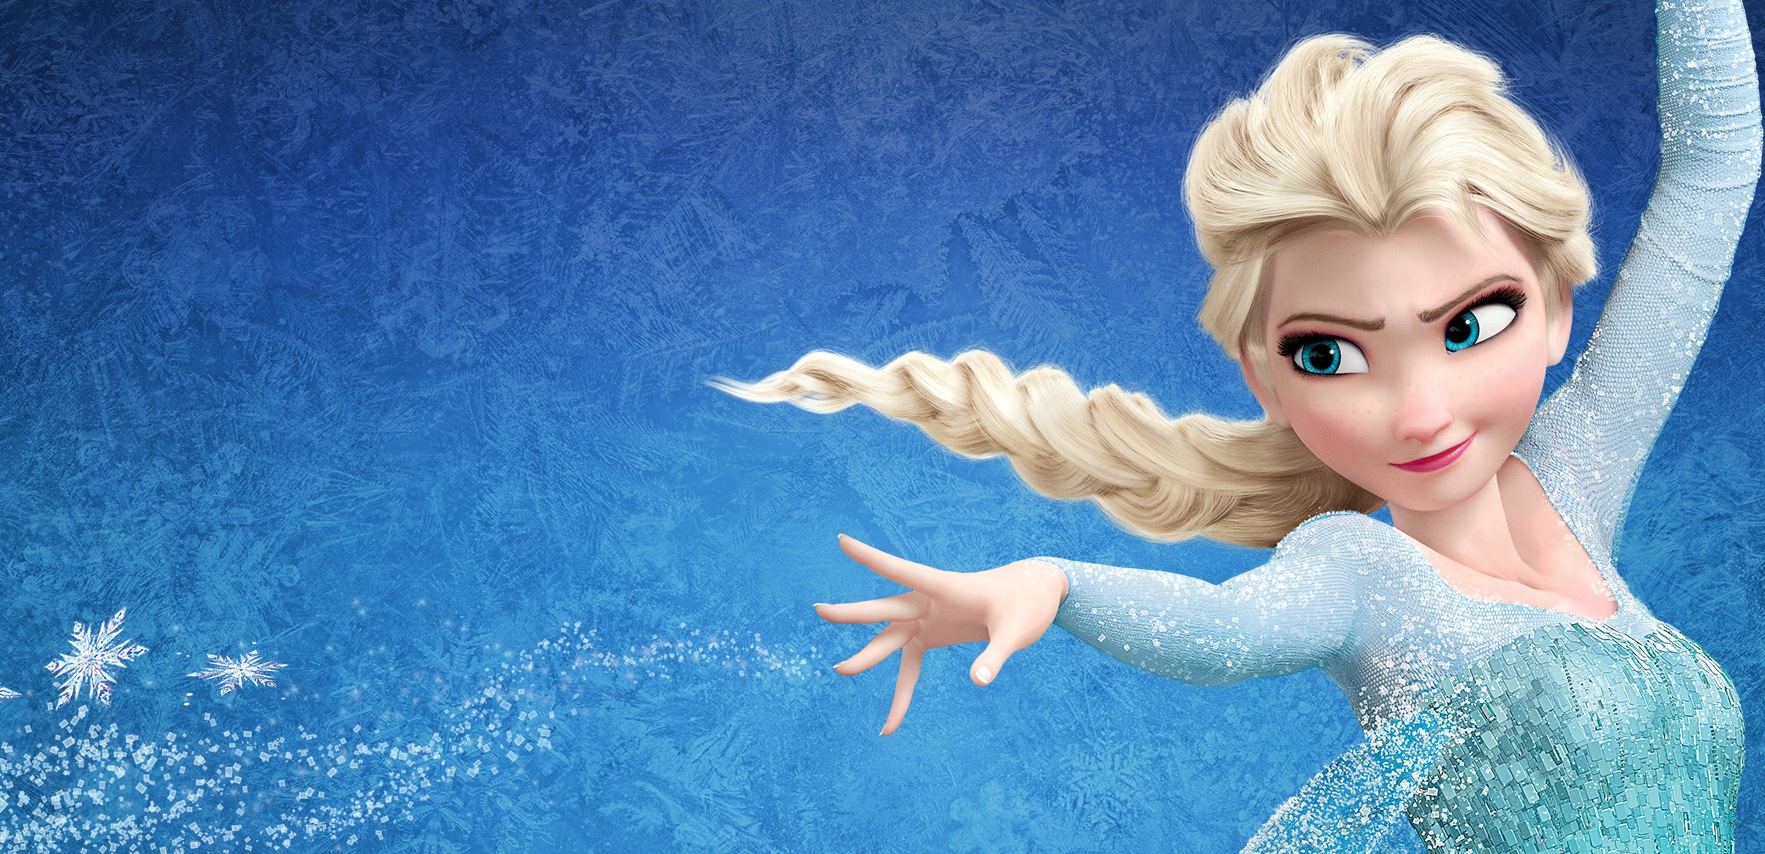 Review Frozen 2013 MOVIES SONGS AND EVERYTHING YOU LOVE